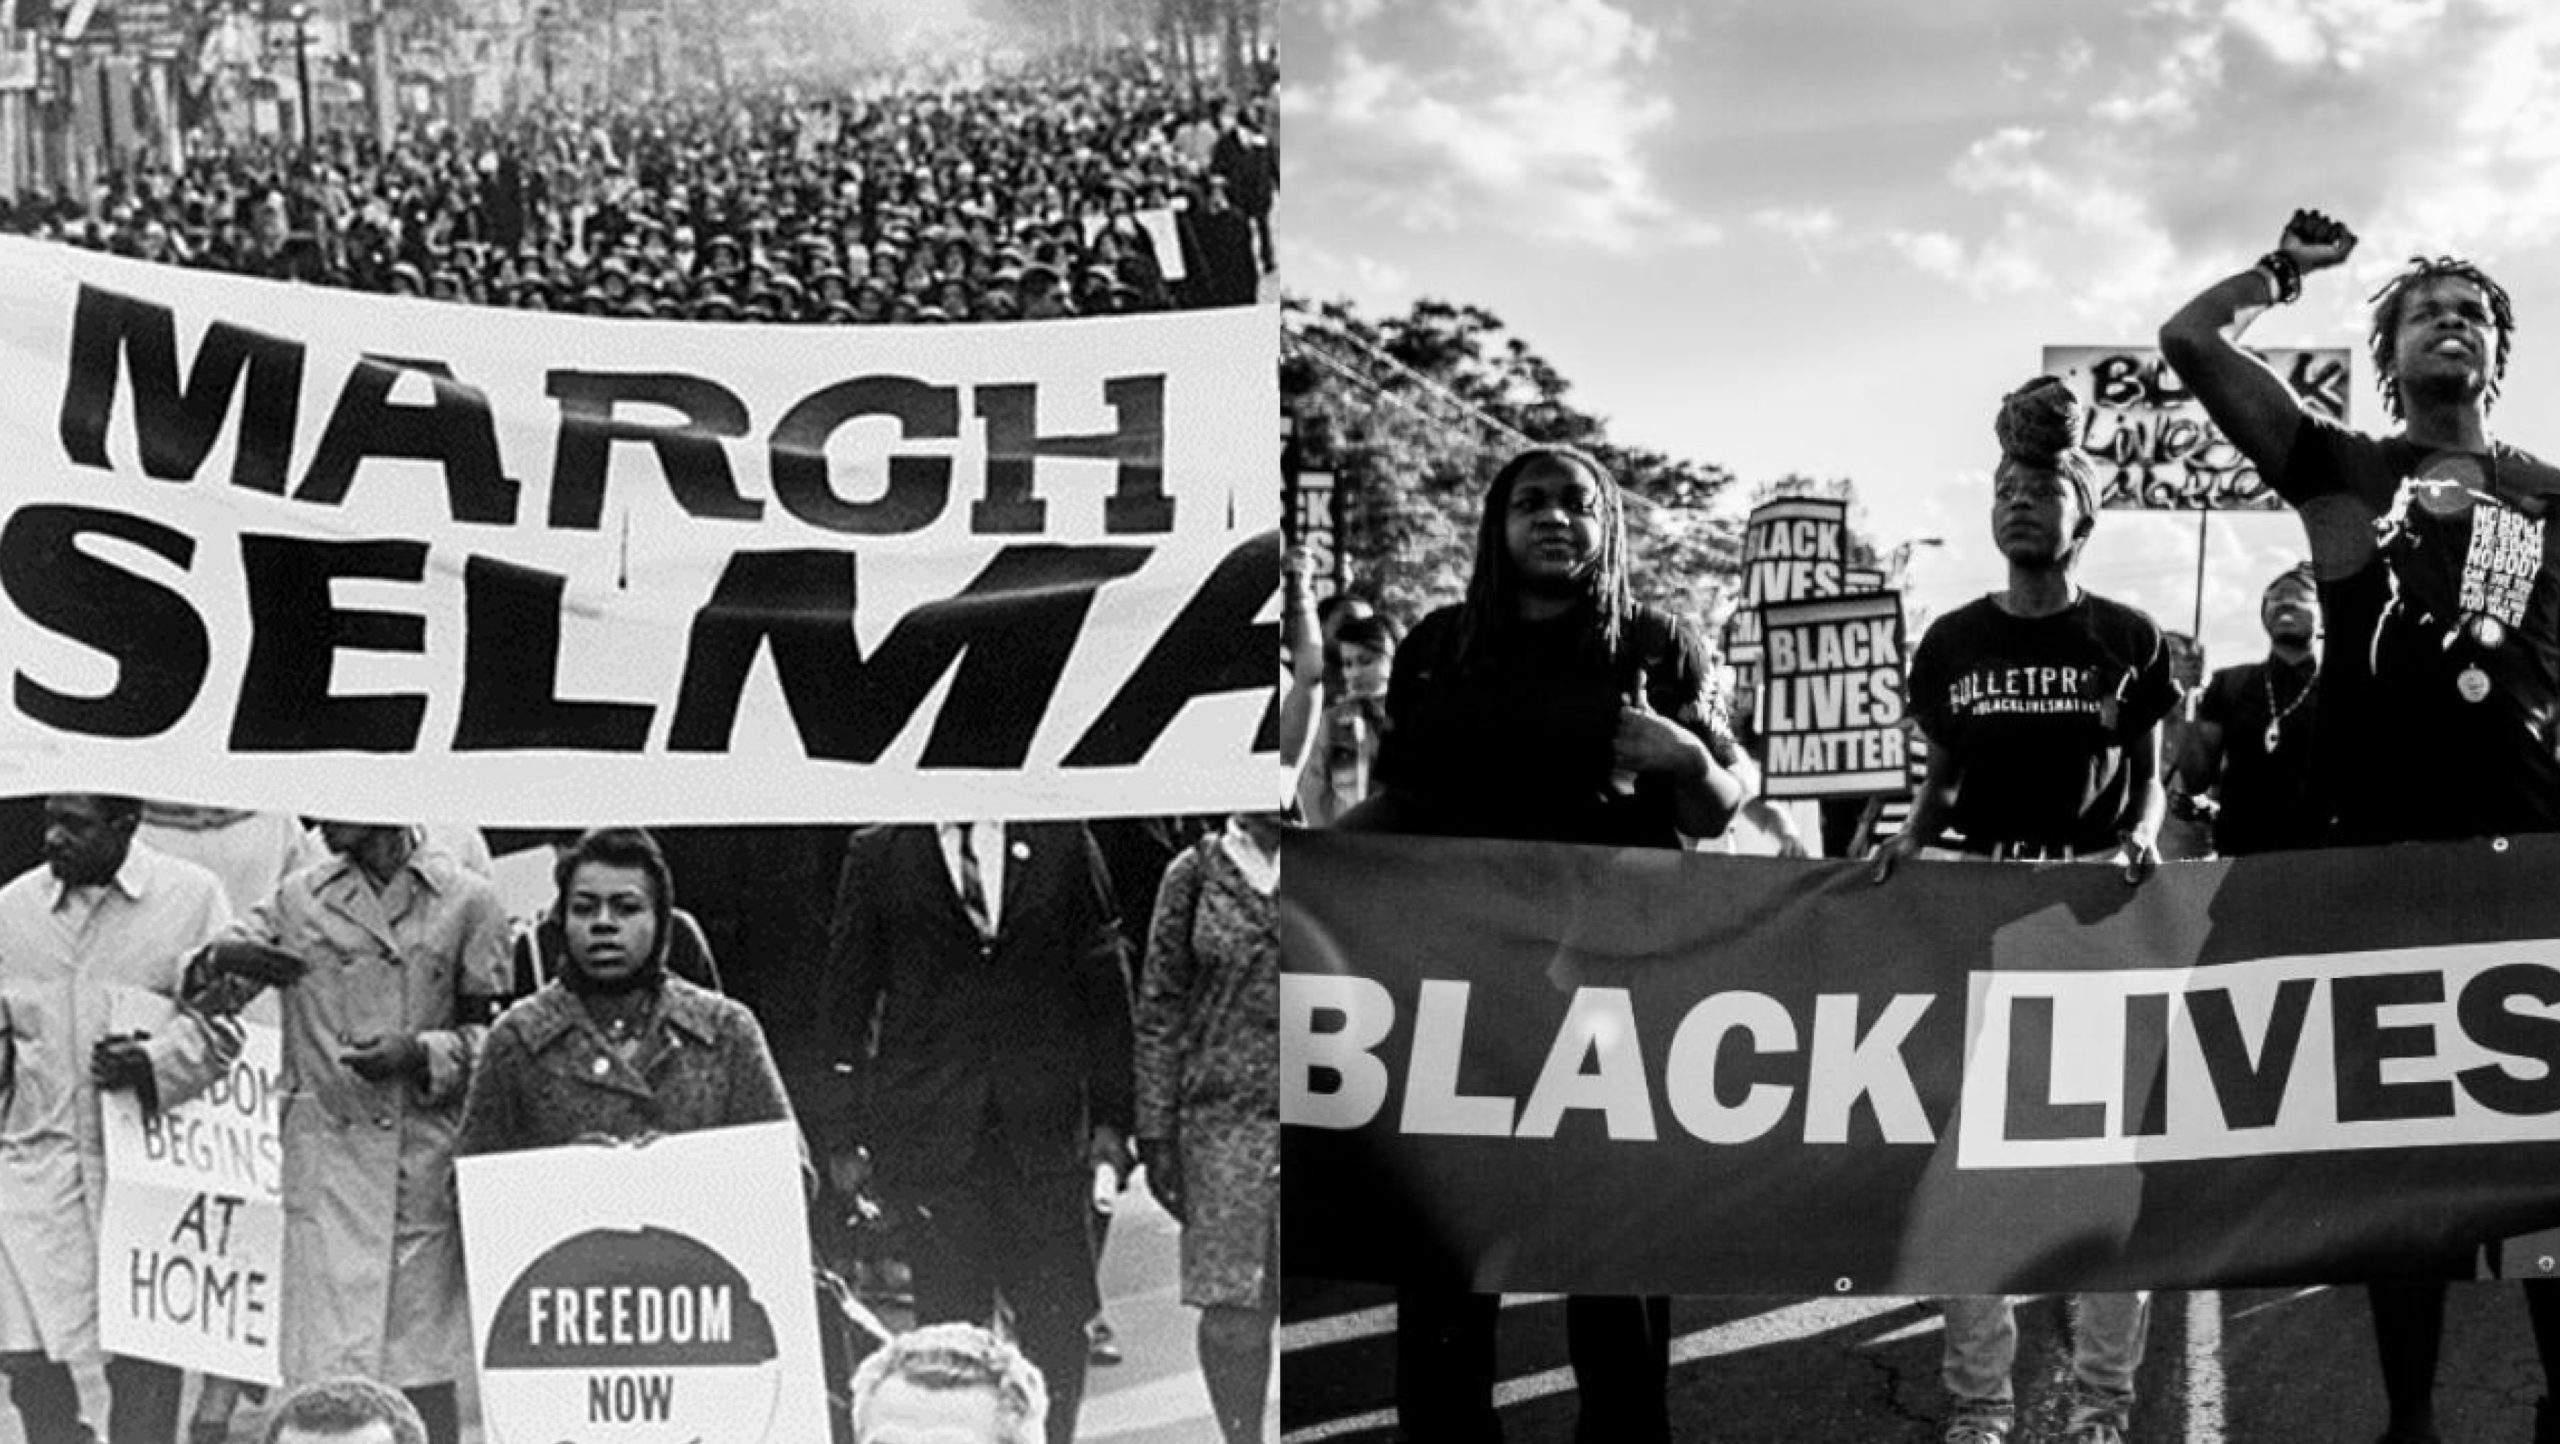 A vintage photo next to a recent photo, both of thousands marching for equal rights for the black community